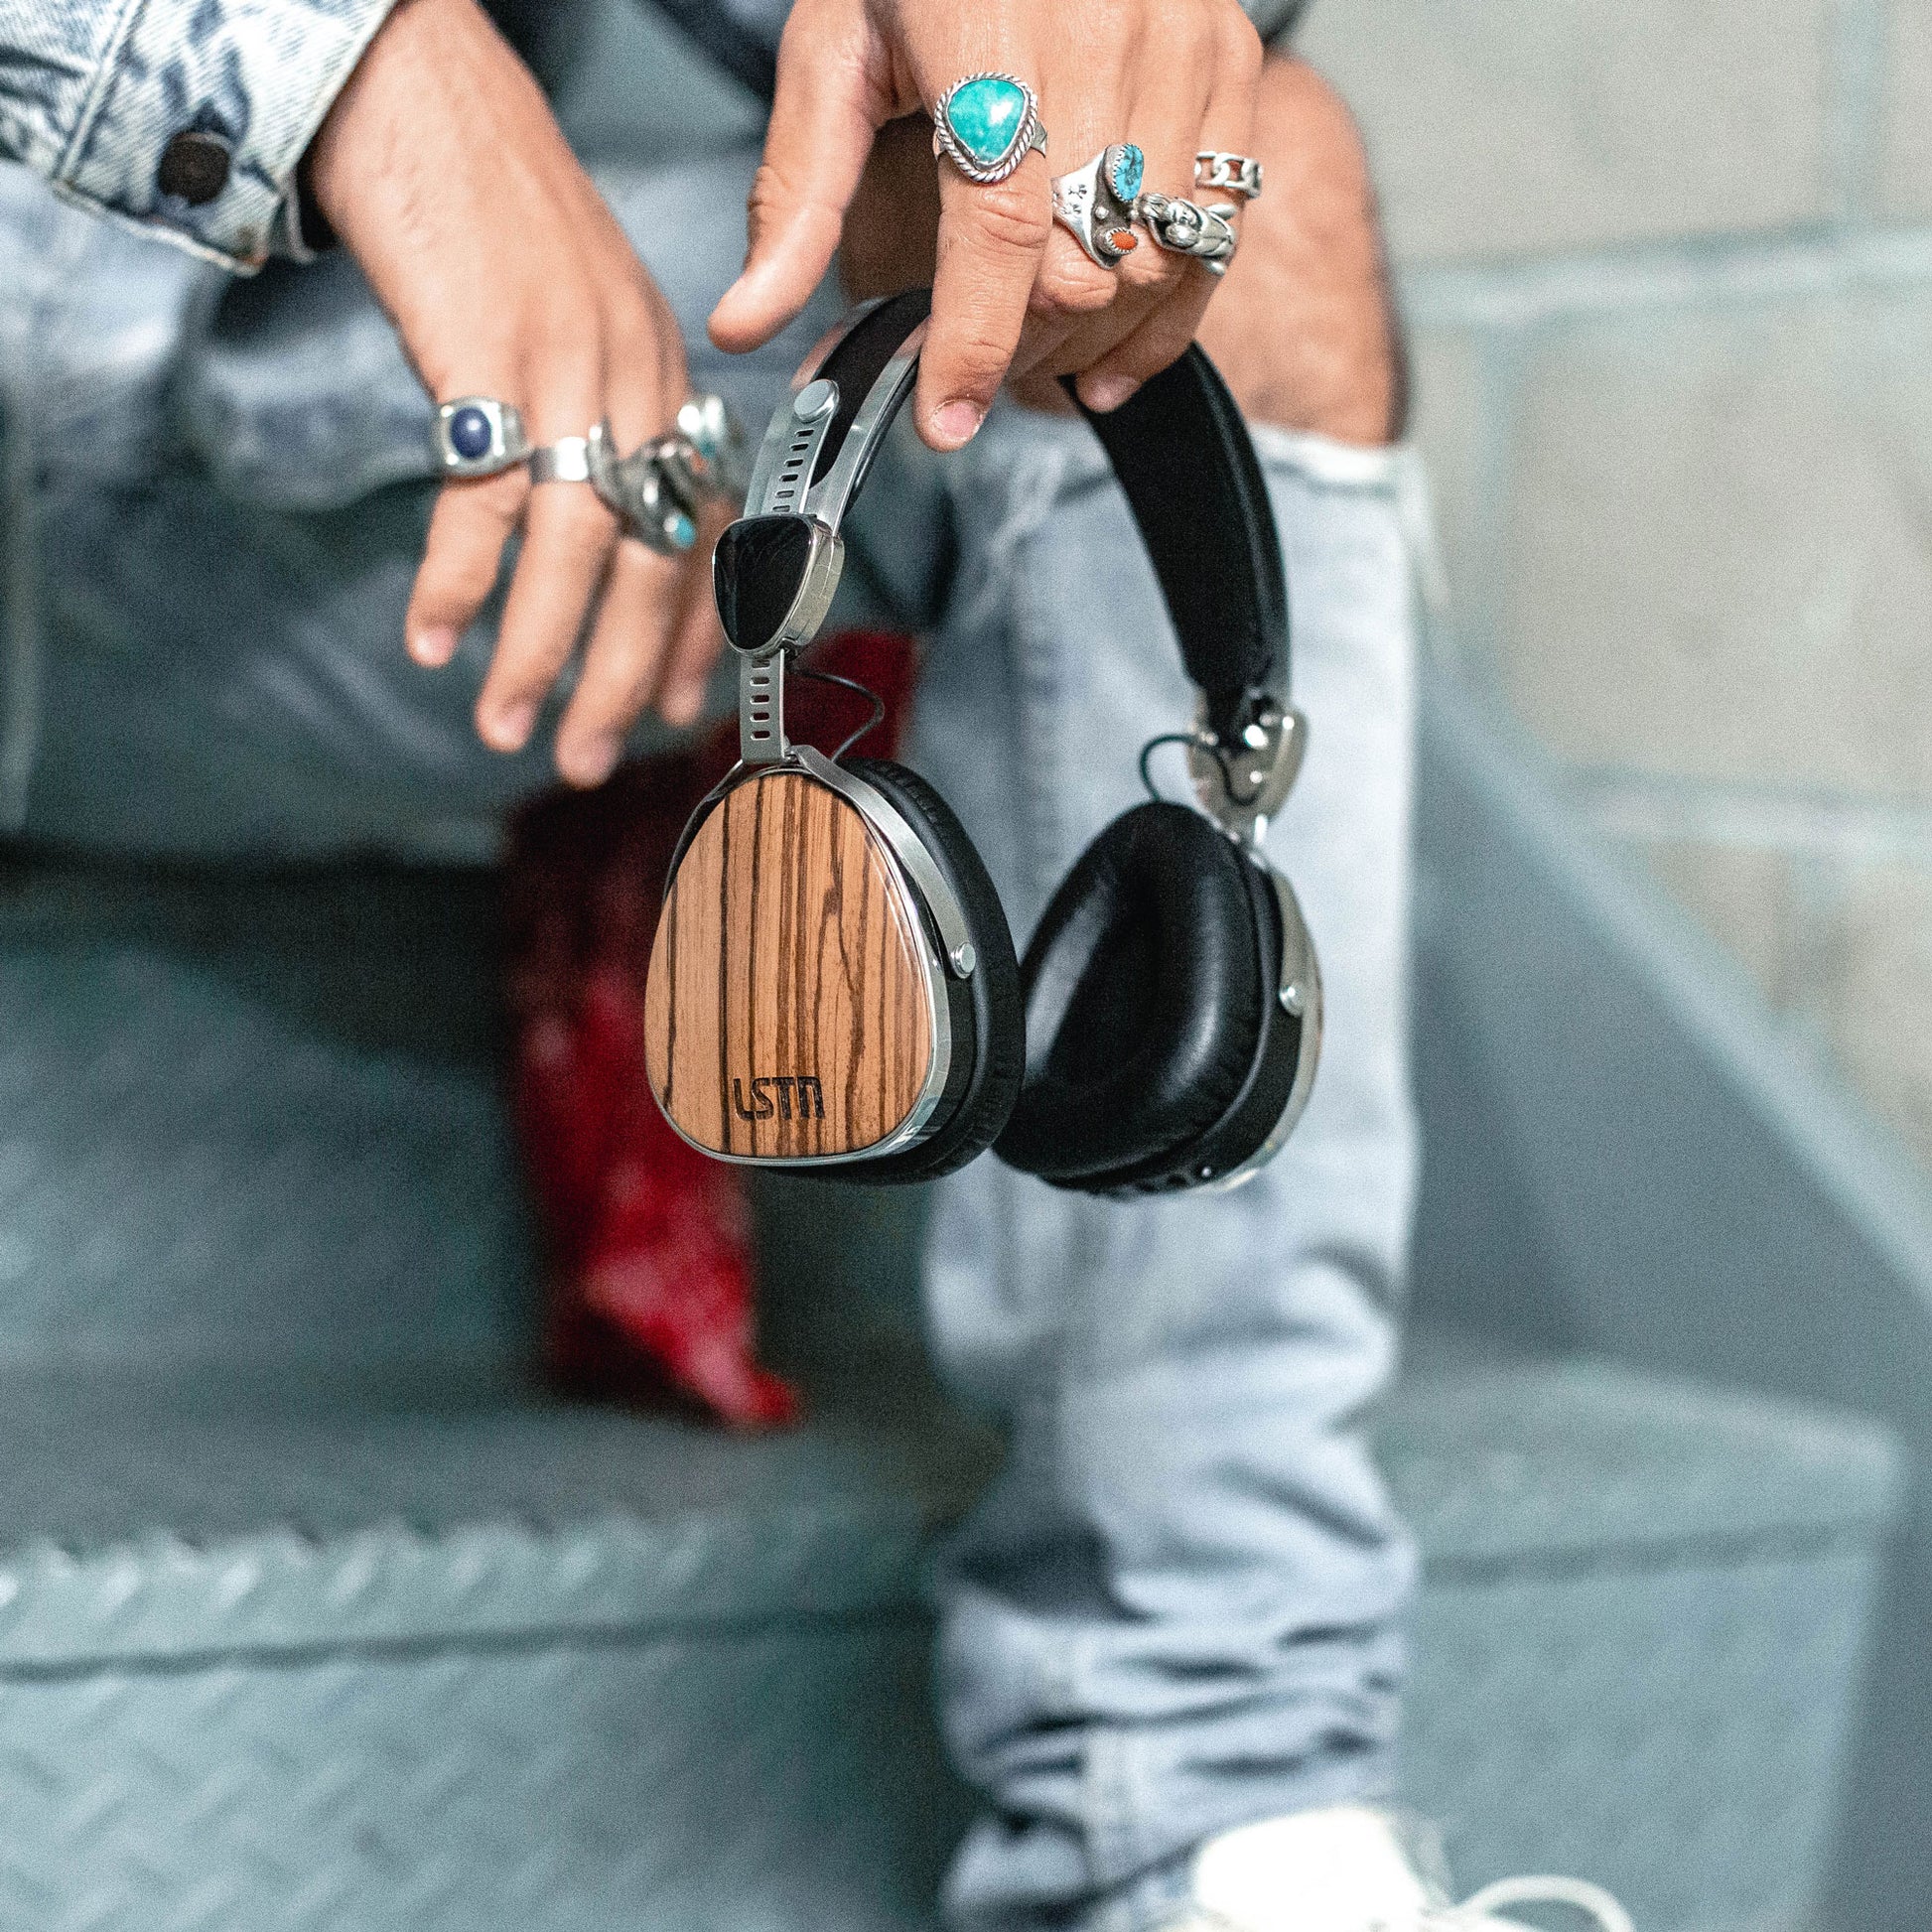 Violins, pianos, guitars — world-class musical instruments are made from wood, so why not headphones? Our real zebra wood housings provide excellent tonal balance with crisp highs and rich lows.